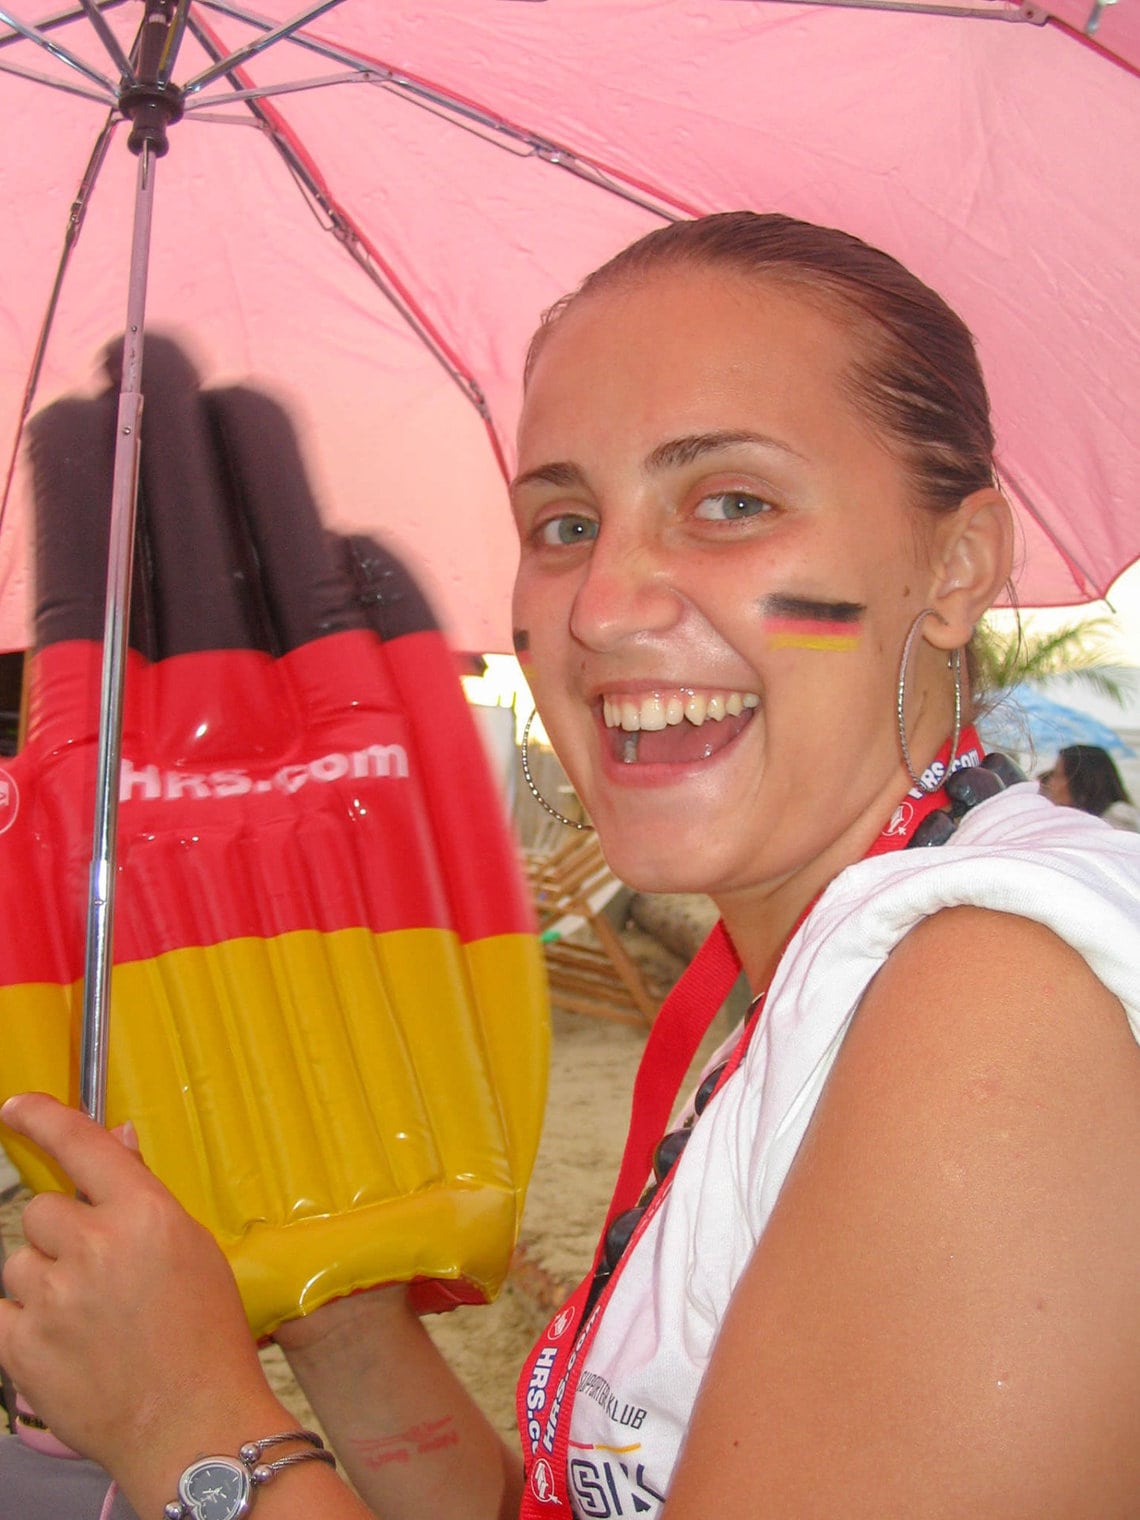 Girl cheering for Germany at the 2006 World Cup in Berlin, with Germany flag stickers on her cheeks.